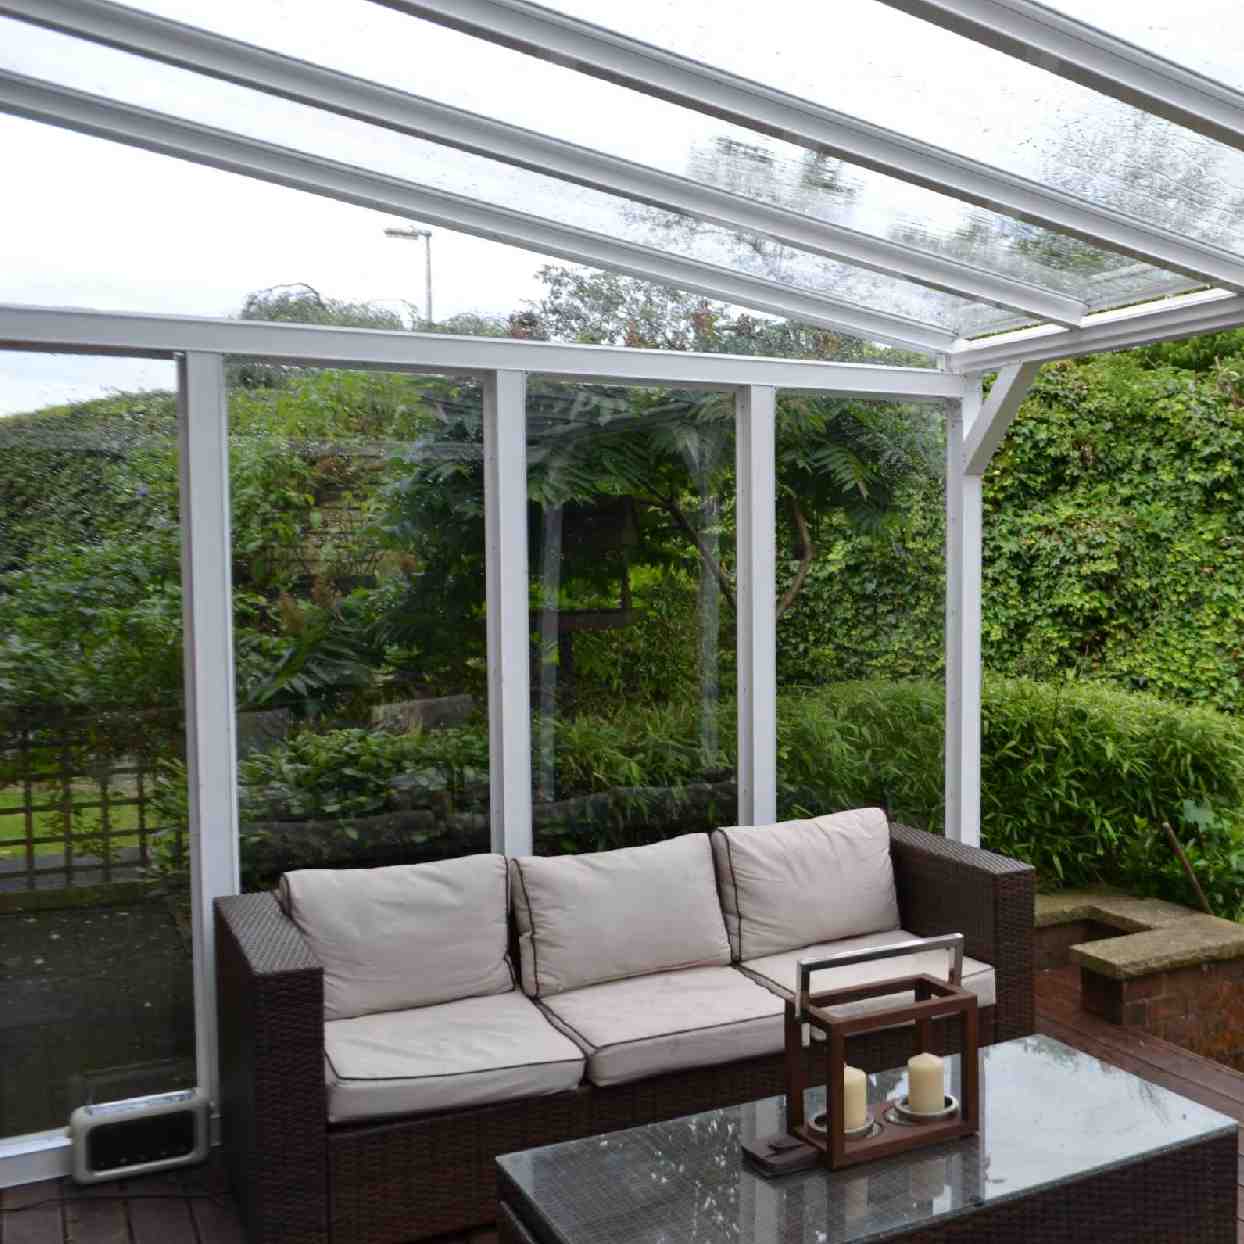 Buy Omega Verandah White with 16mm Polycarbonate Glazing - 6.3m (W) x 1.5m (P), (4) Supporting Posts online today